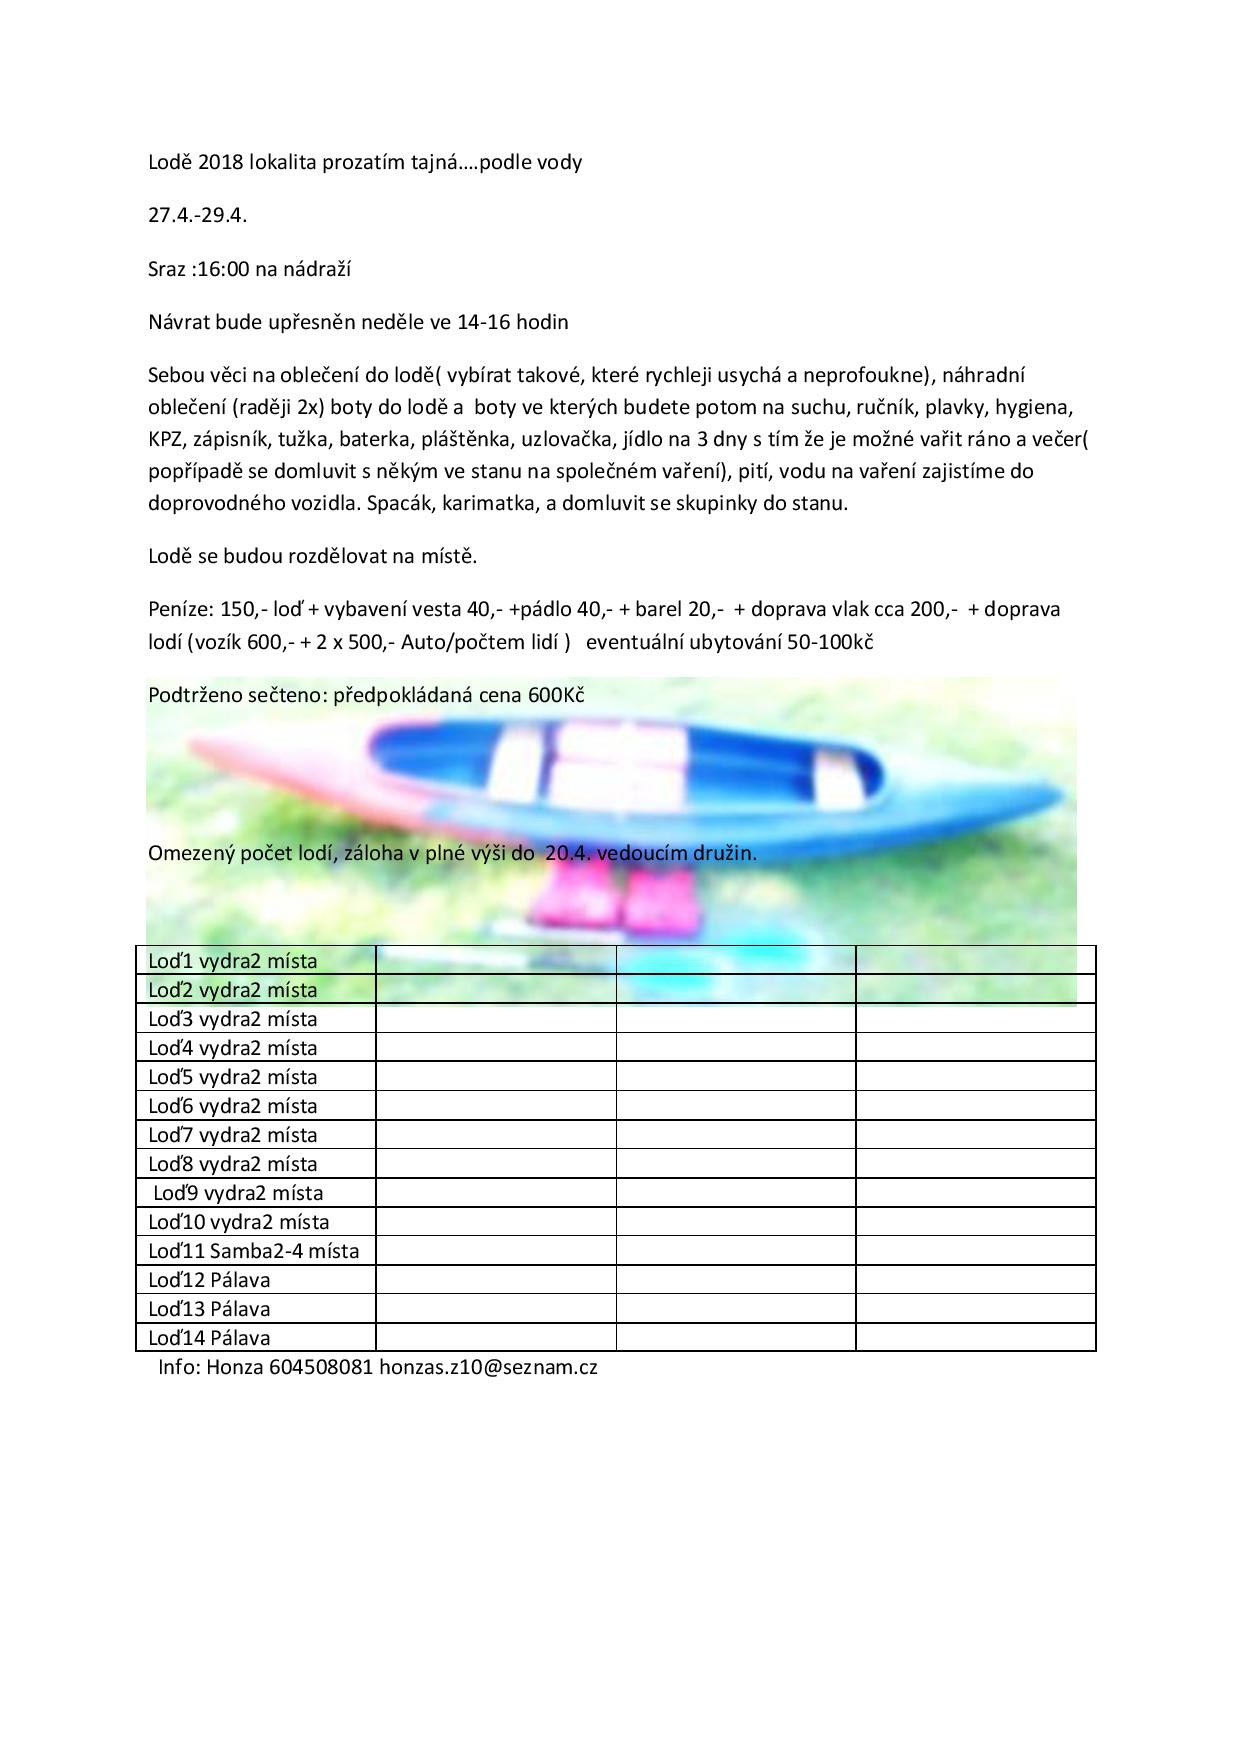 document-page-001.jpg